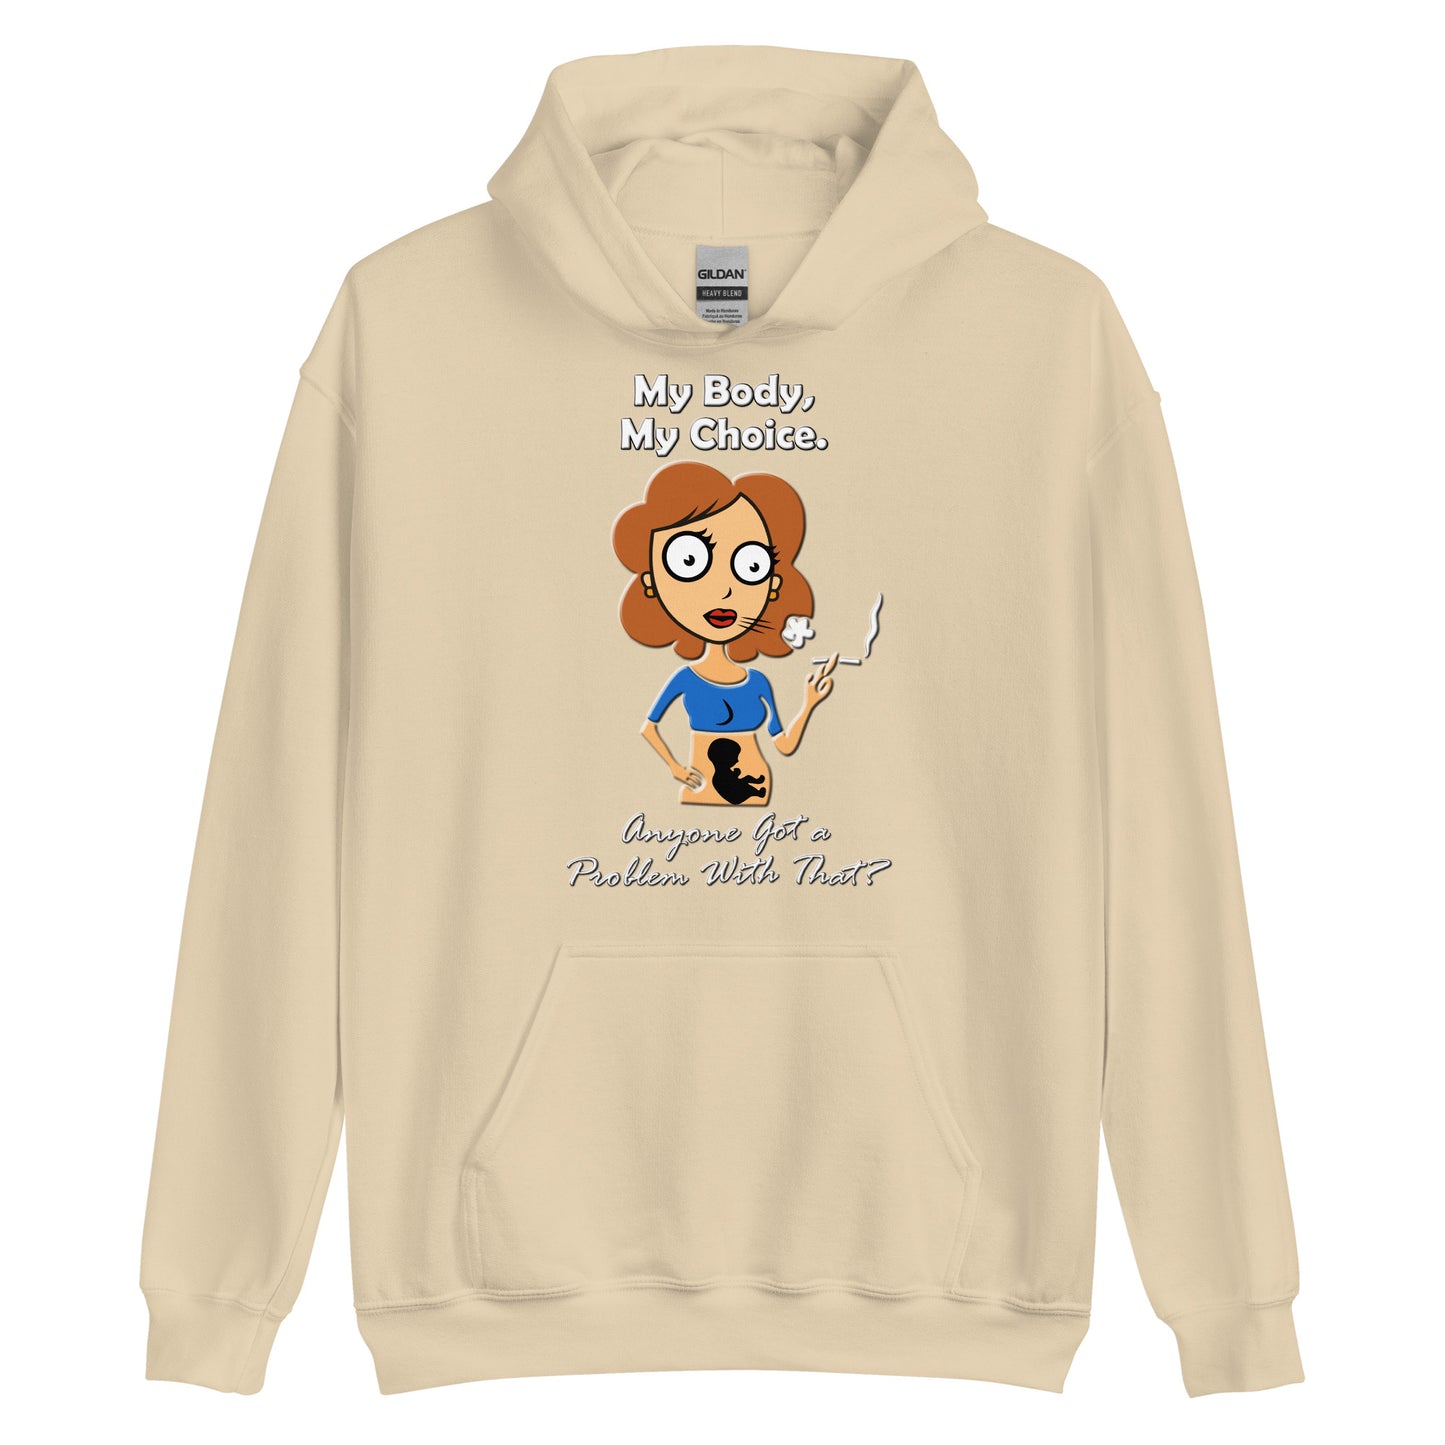 A015 Hoodie – Gildan 18500 Unisex Hoodie Featuring a Graphic of a Young Pregnant Woman Smoking, with the Text “My Body, My Choice – Anyone Got a Problem with That?”